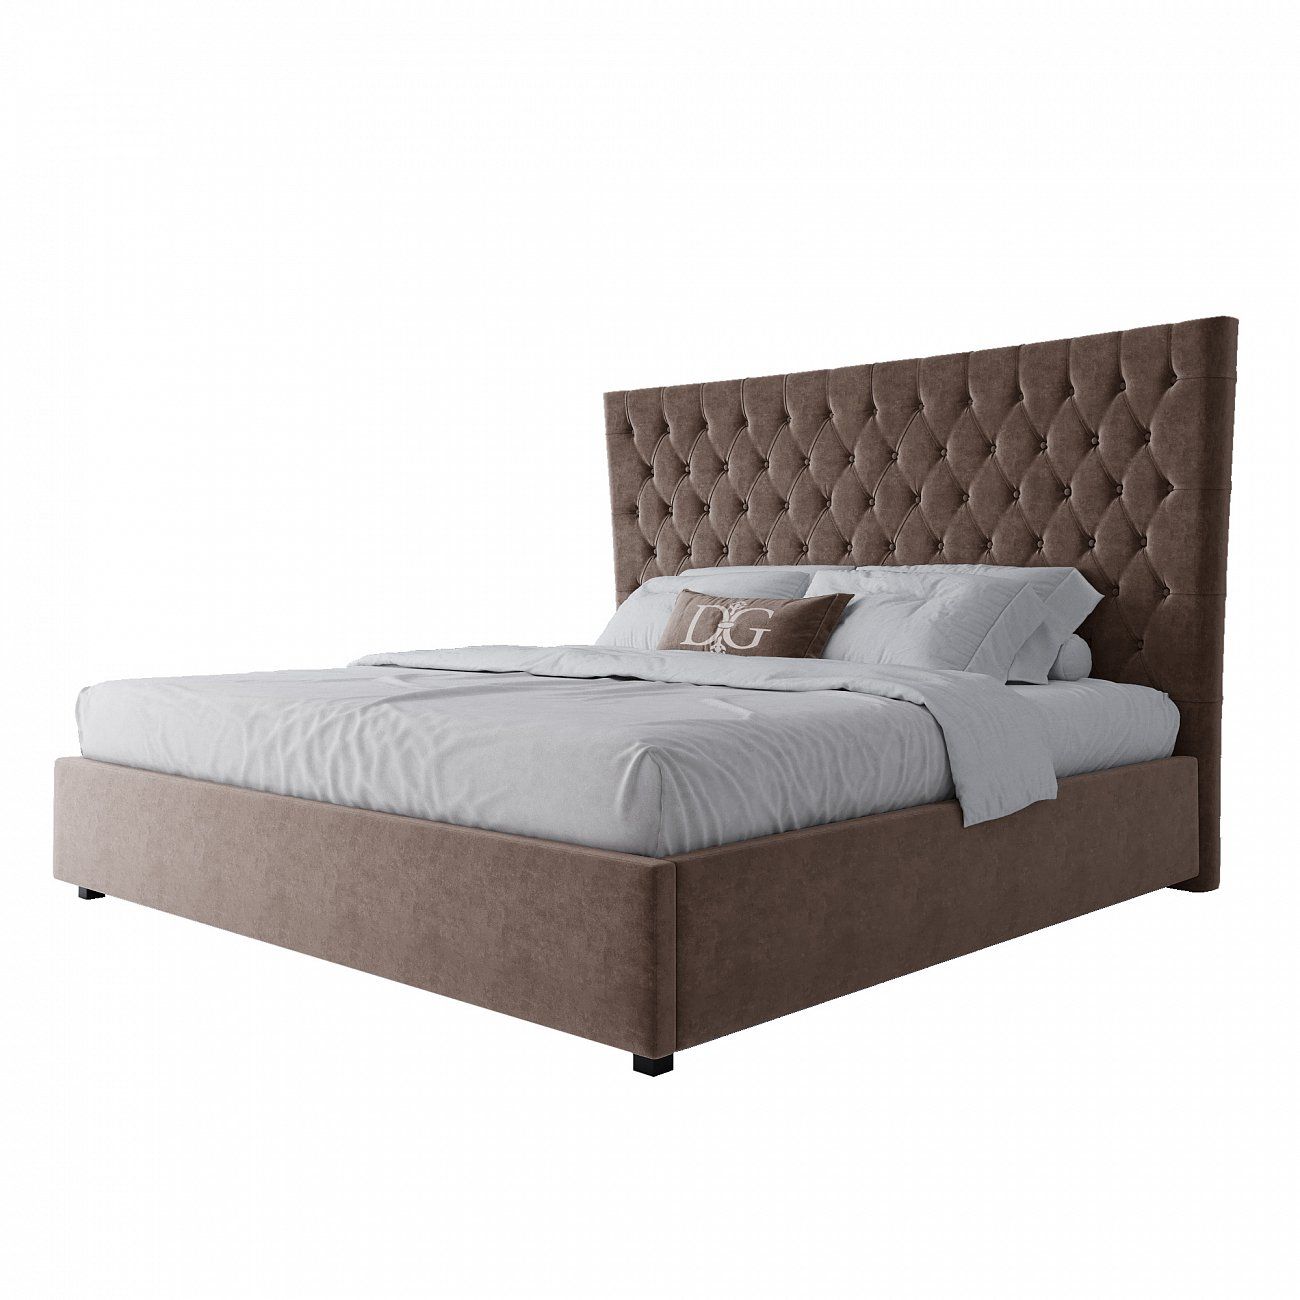 Euro bed with upholstered headboard 200x200 cm grey-brown QuickSand